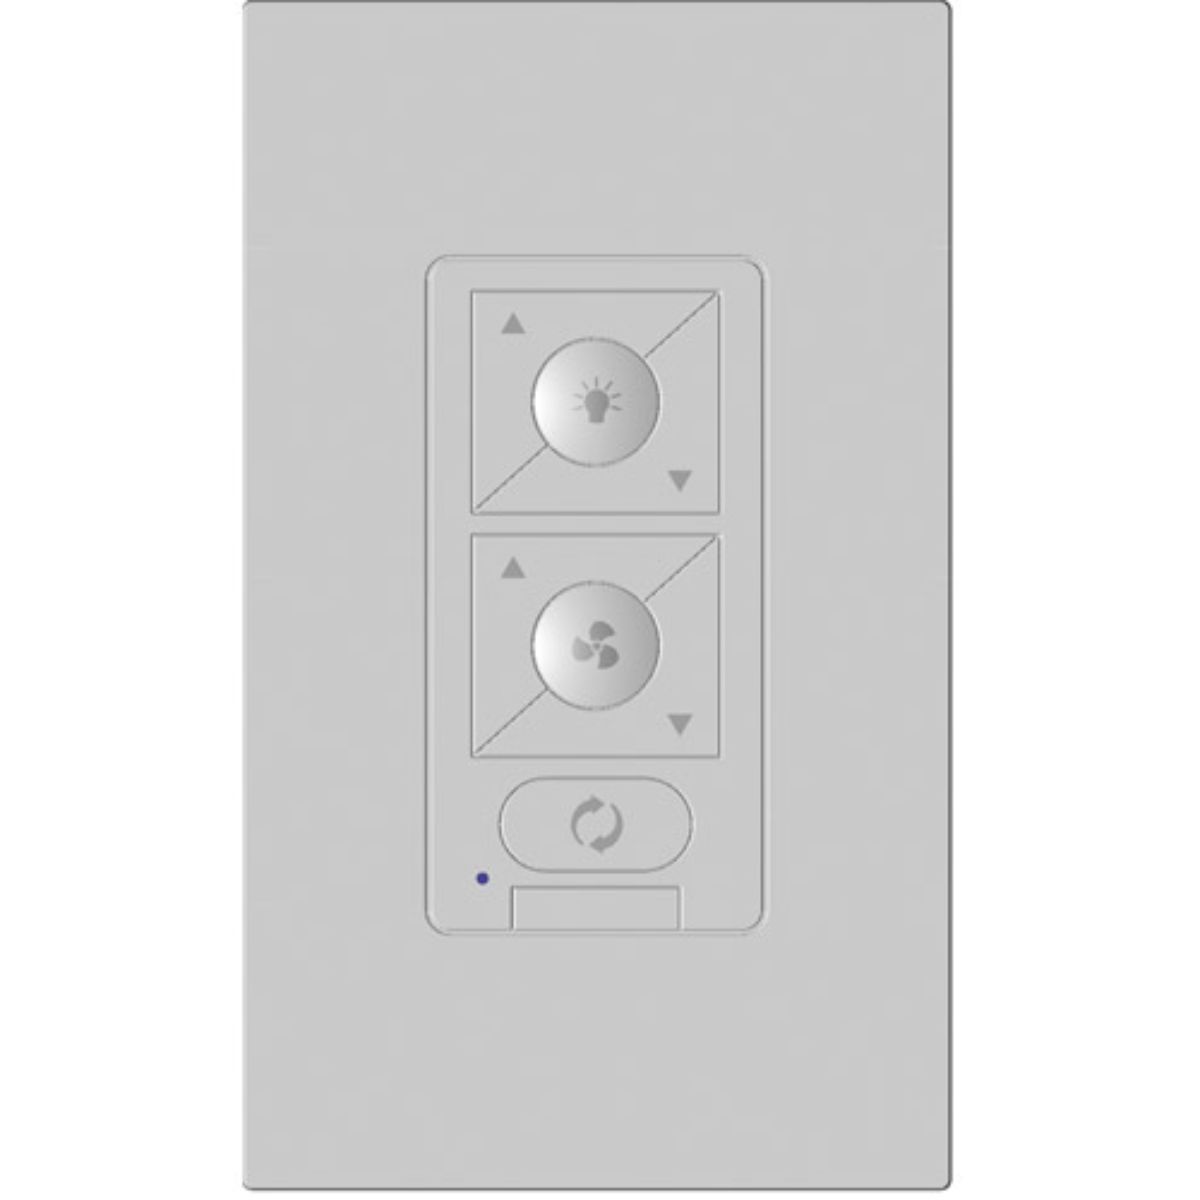 6 speed Ceiling Fan and Light Bluetooth Wall Control, White Finish